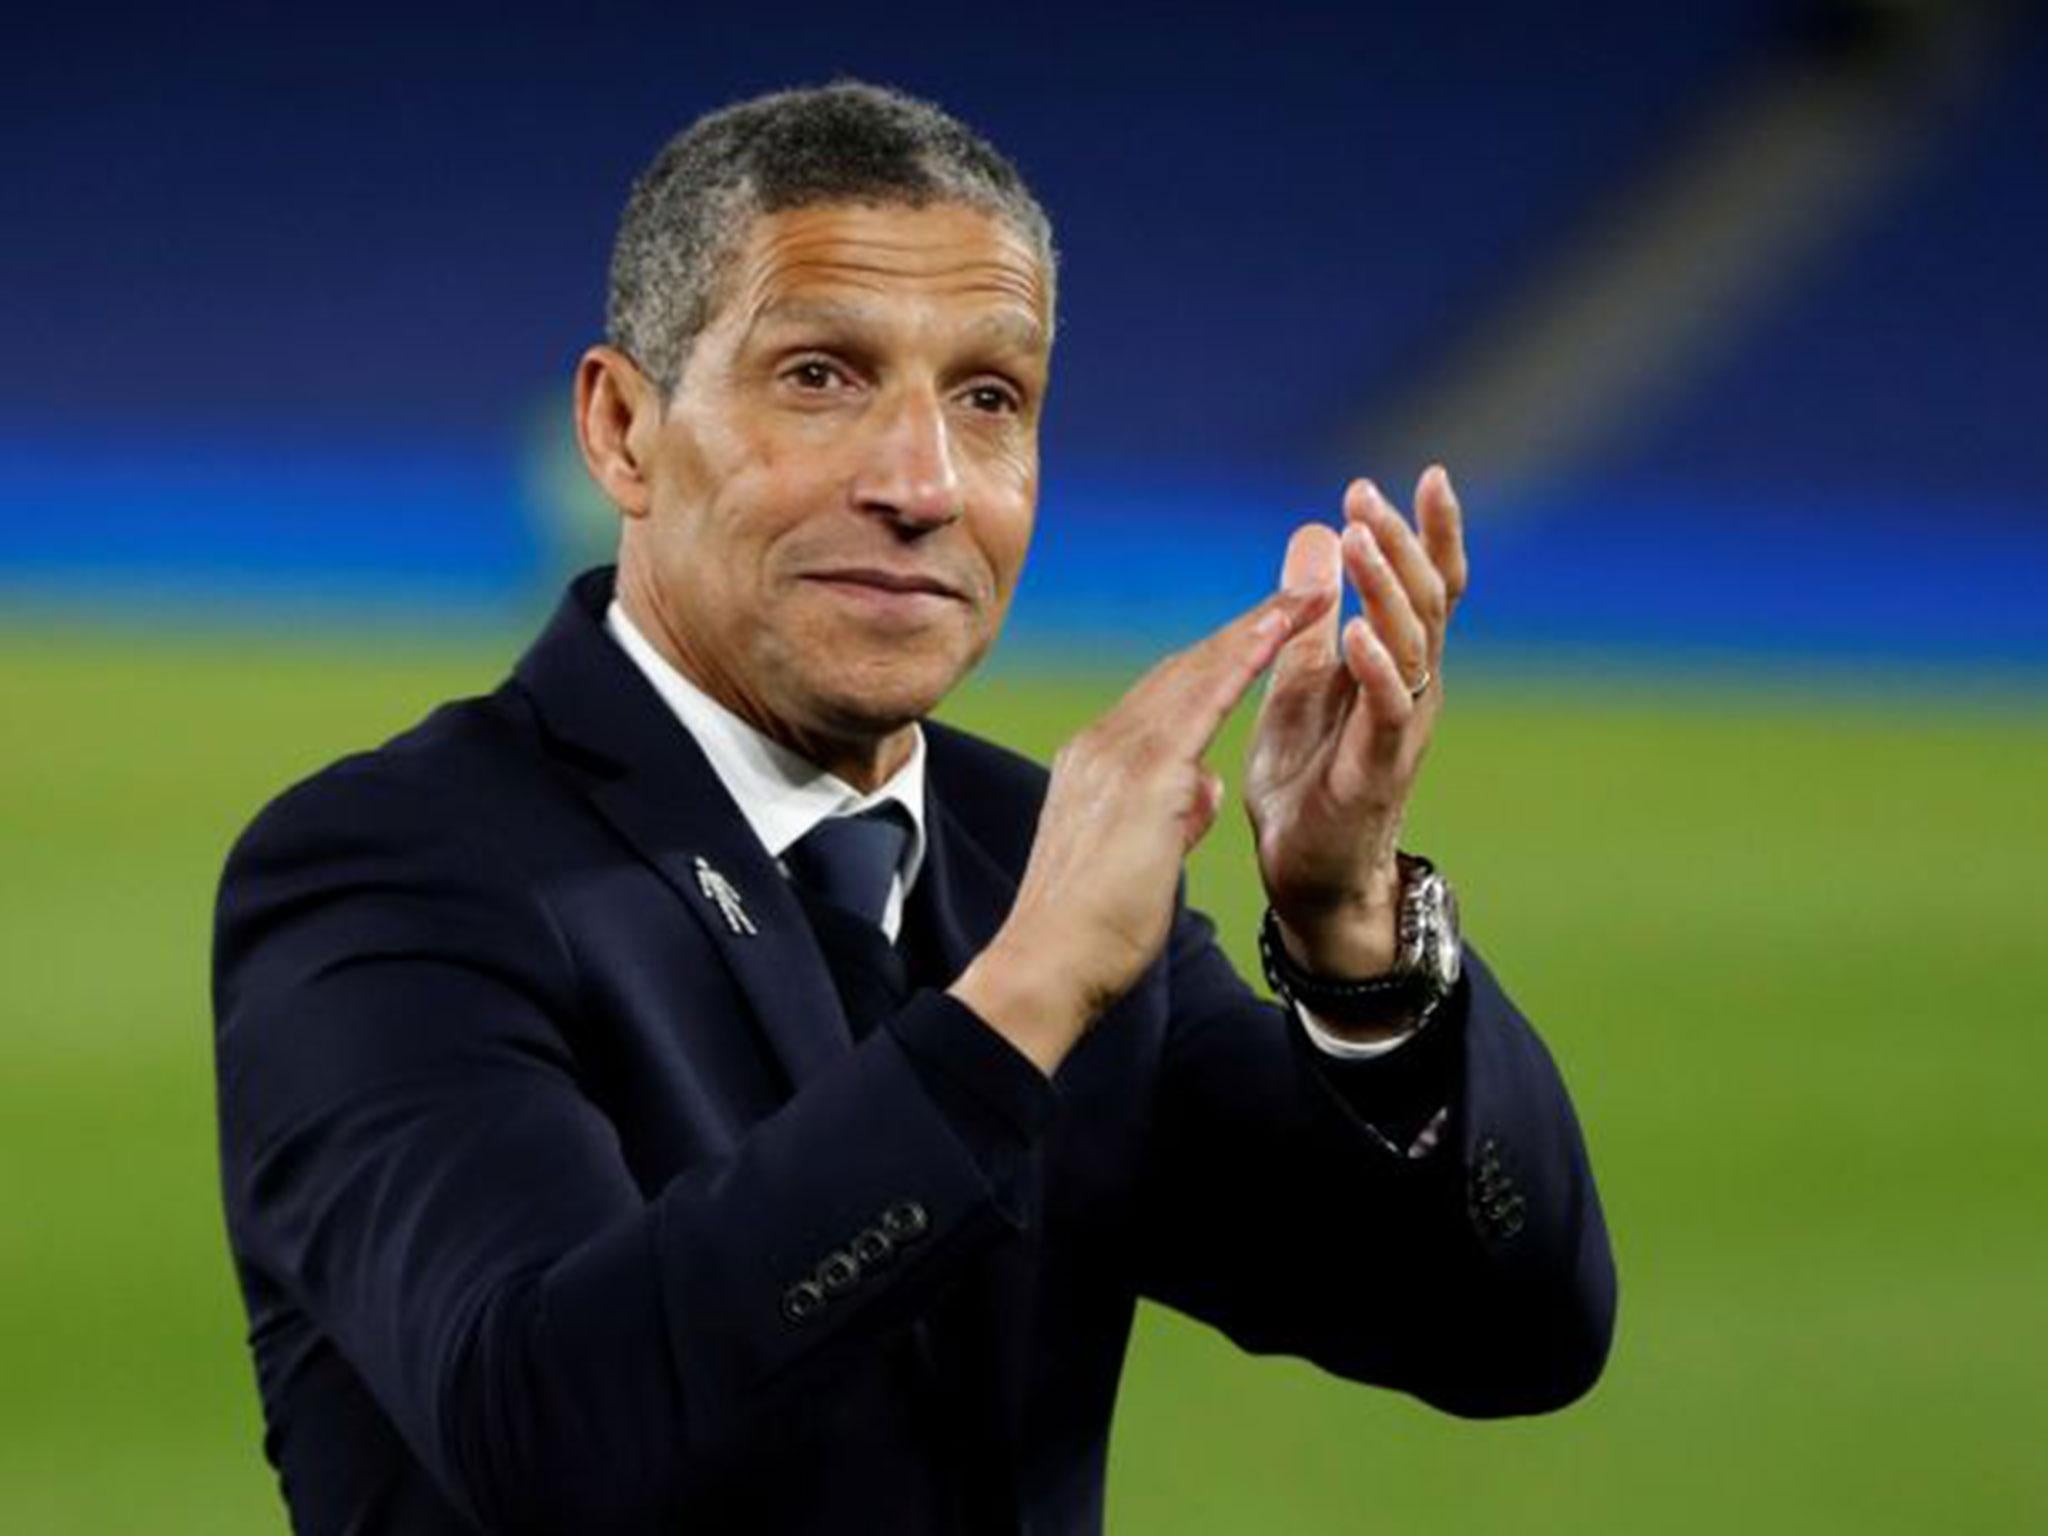 Hughton's side are already safe with two games to spare